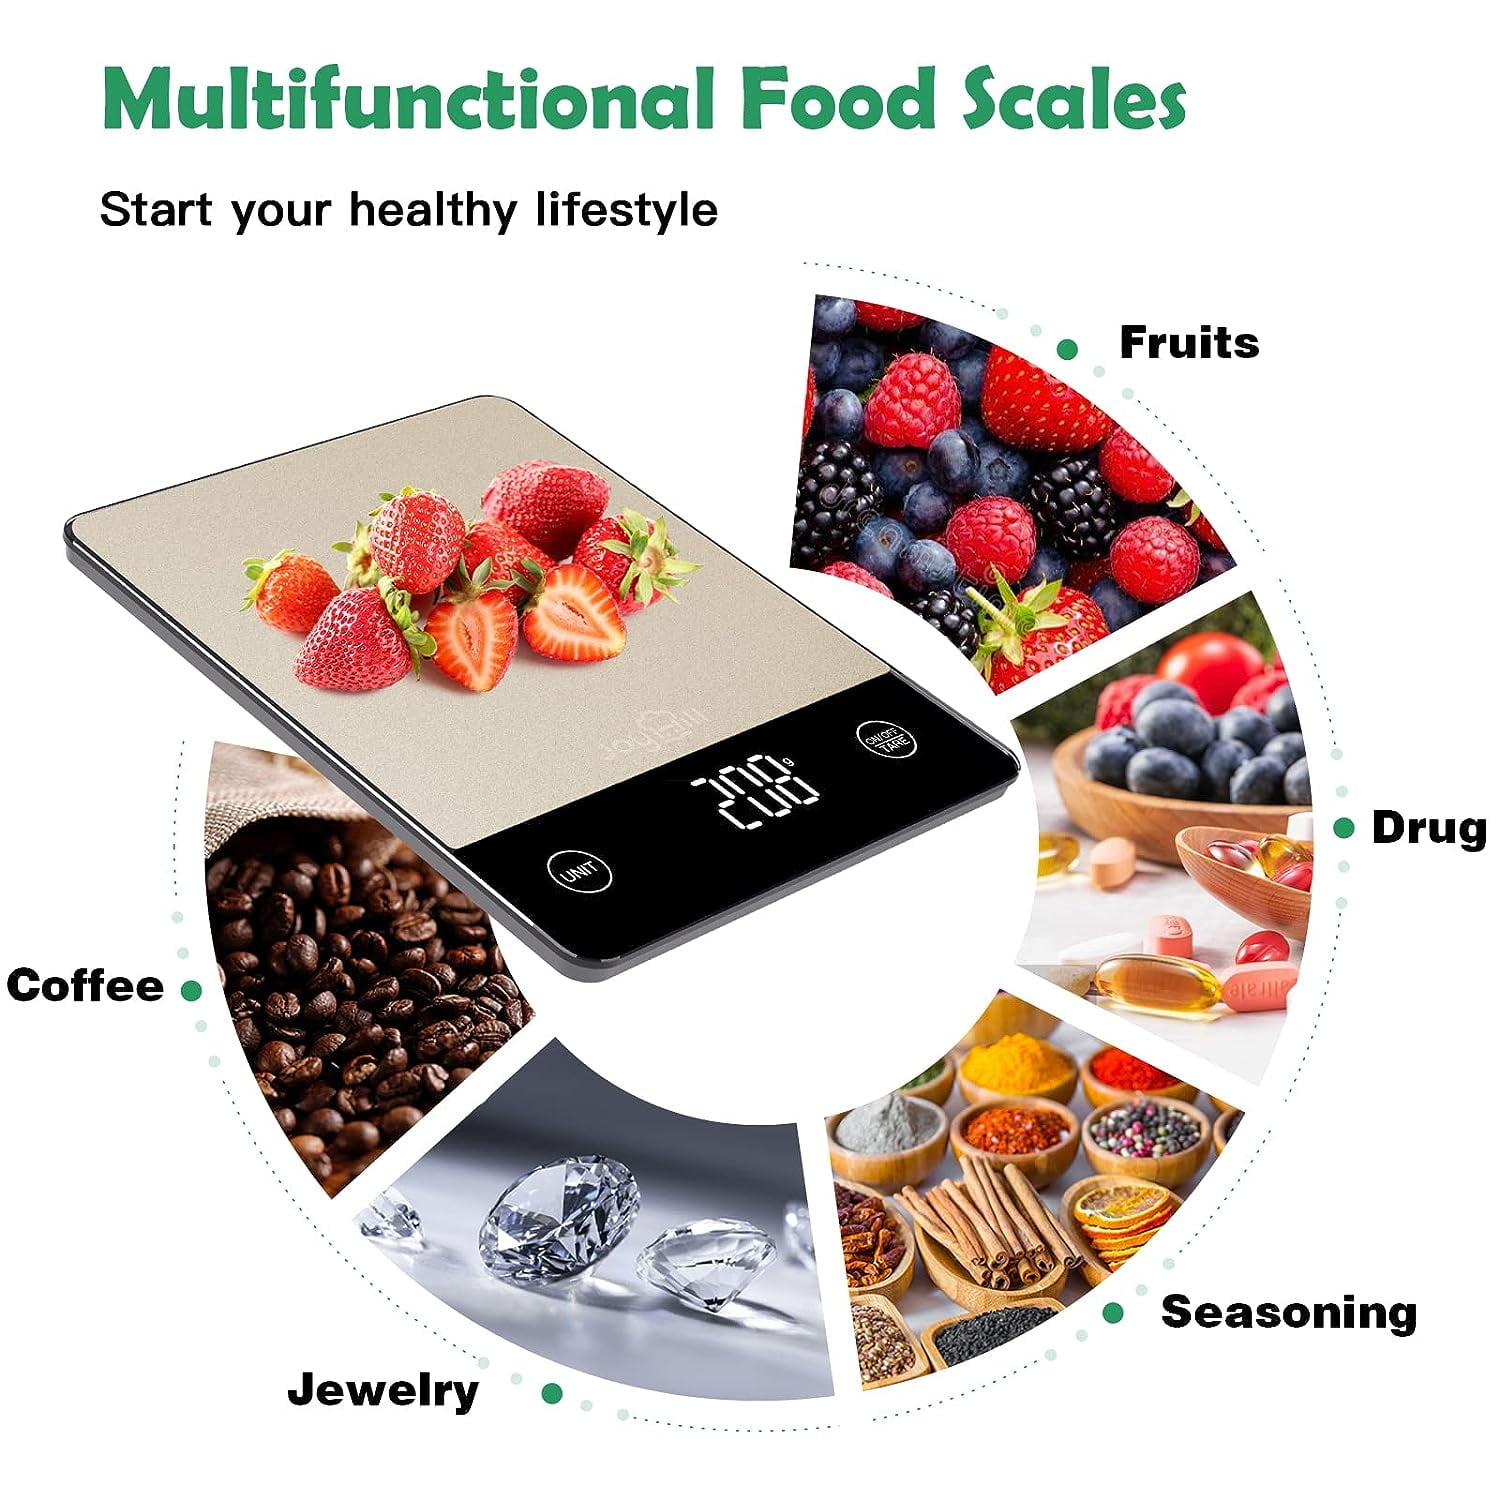 Food Scales Just got a whole lot more interesting